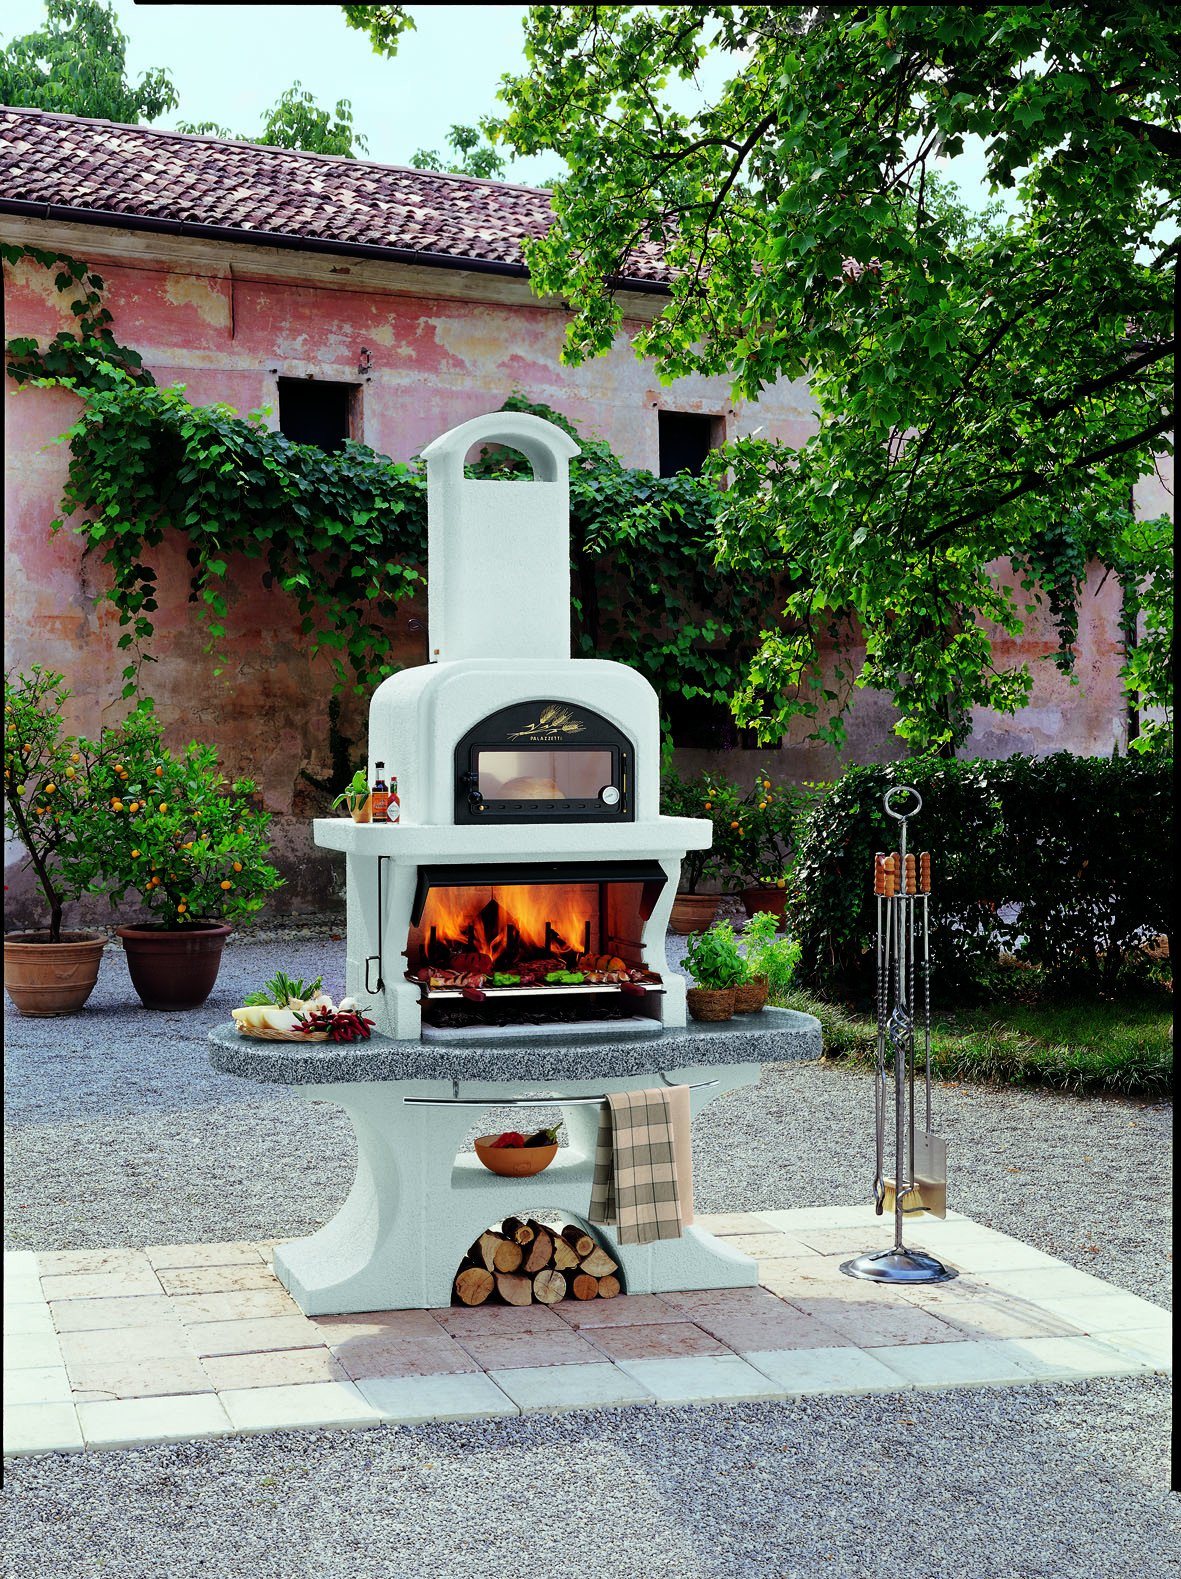 Palazzetti CAPRI 2 Barbecue Outdoor Cooking Grill By Paini Pizza Ovens Paini 